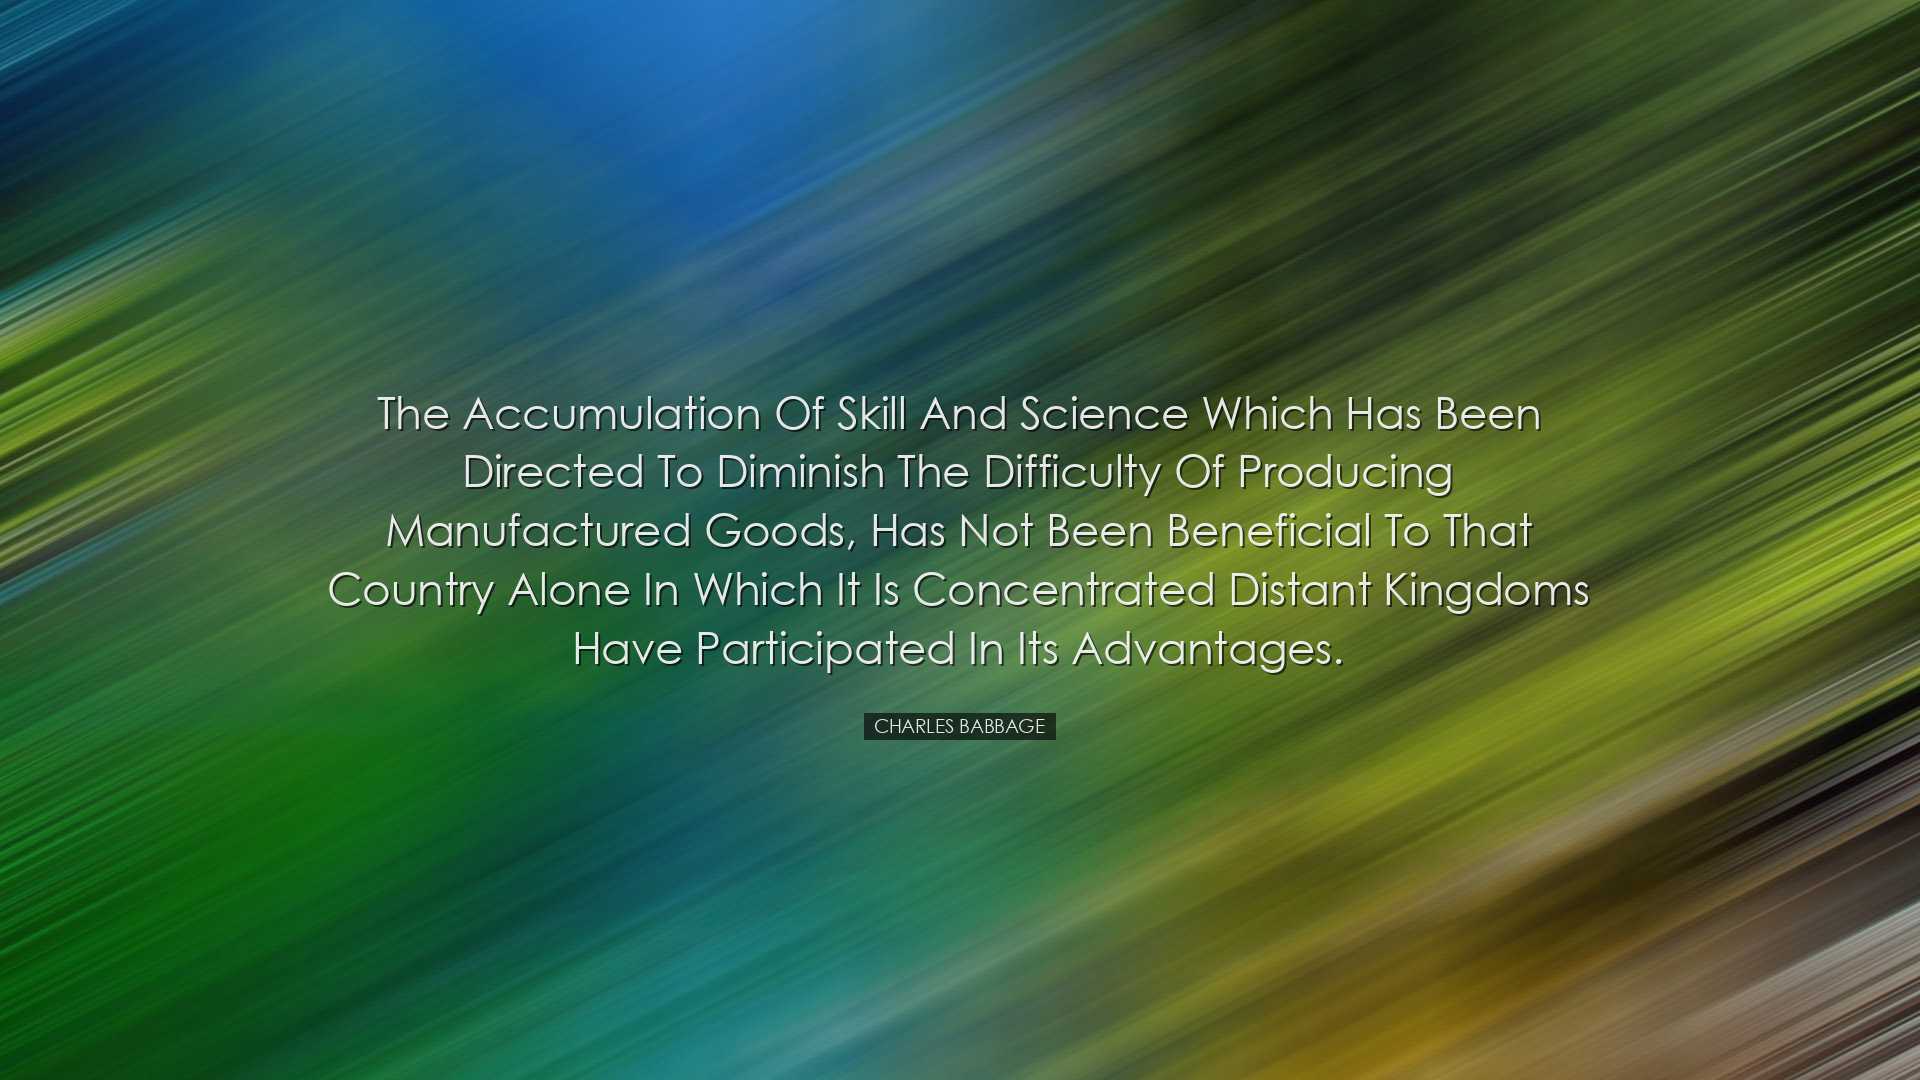 The accumulation of skill and science which has been directed to d